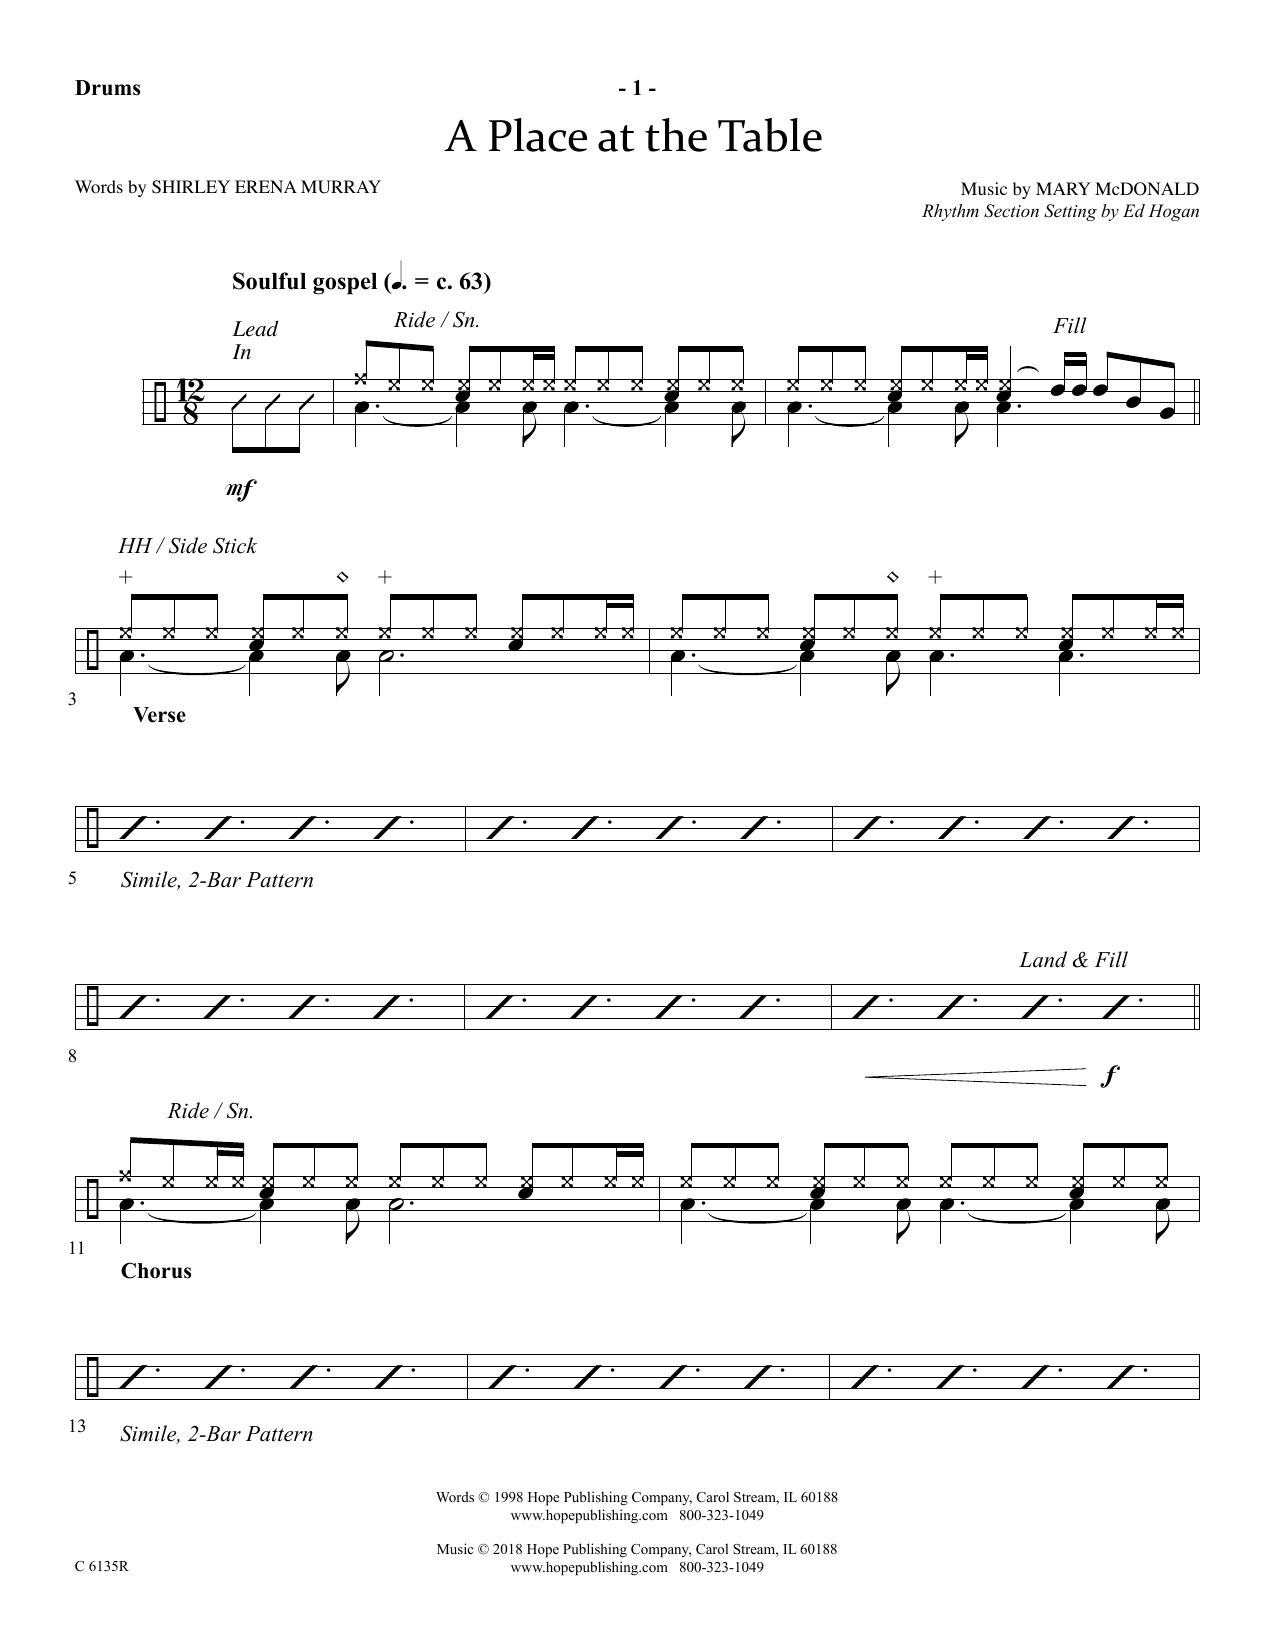 Download Ed Hogan A Place At The Table - Drums Sheet Music